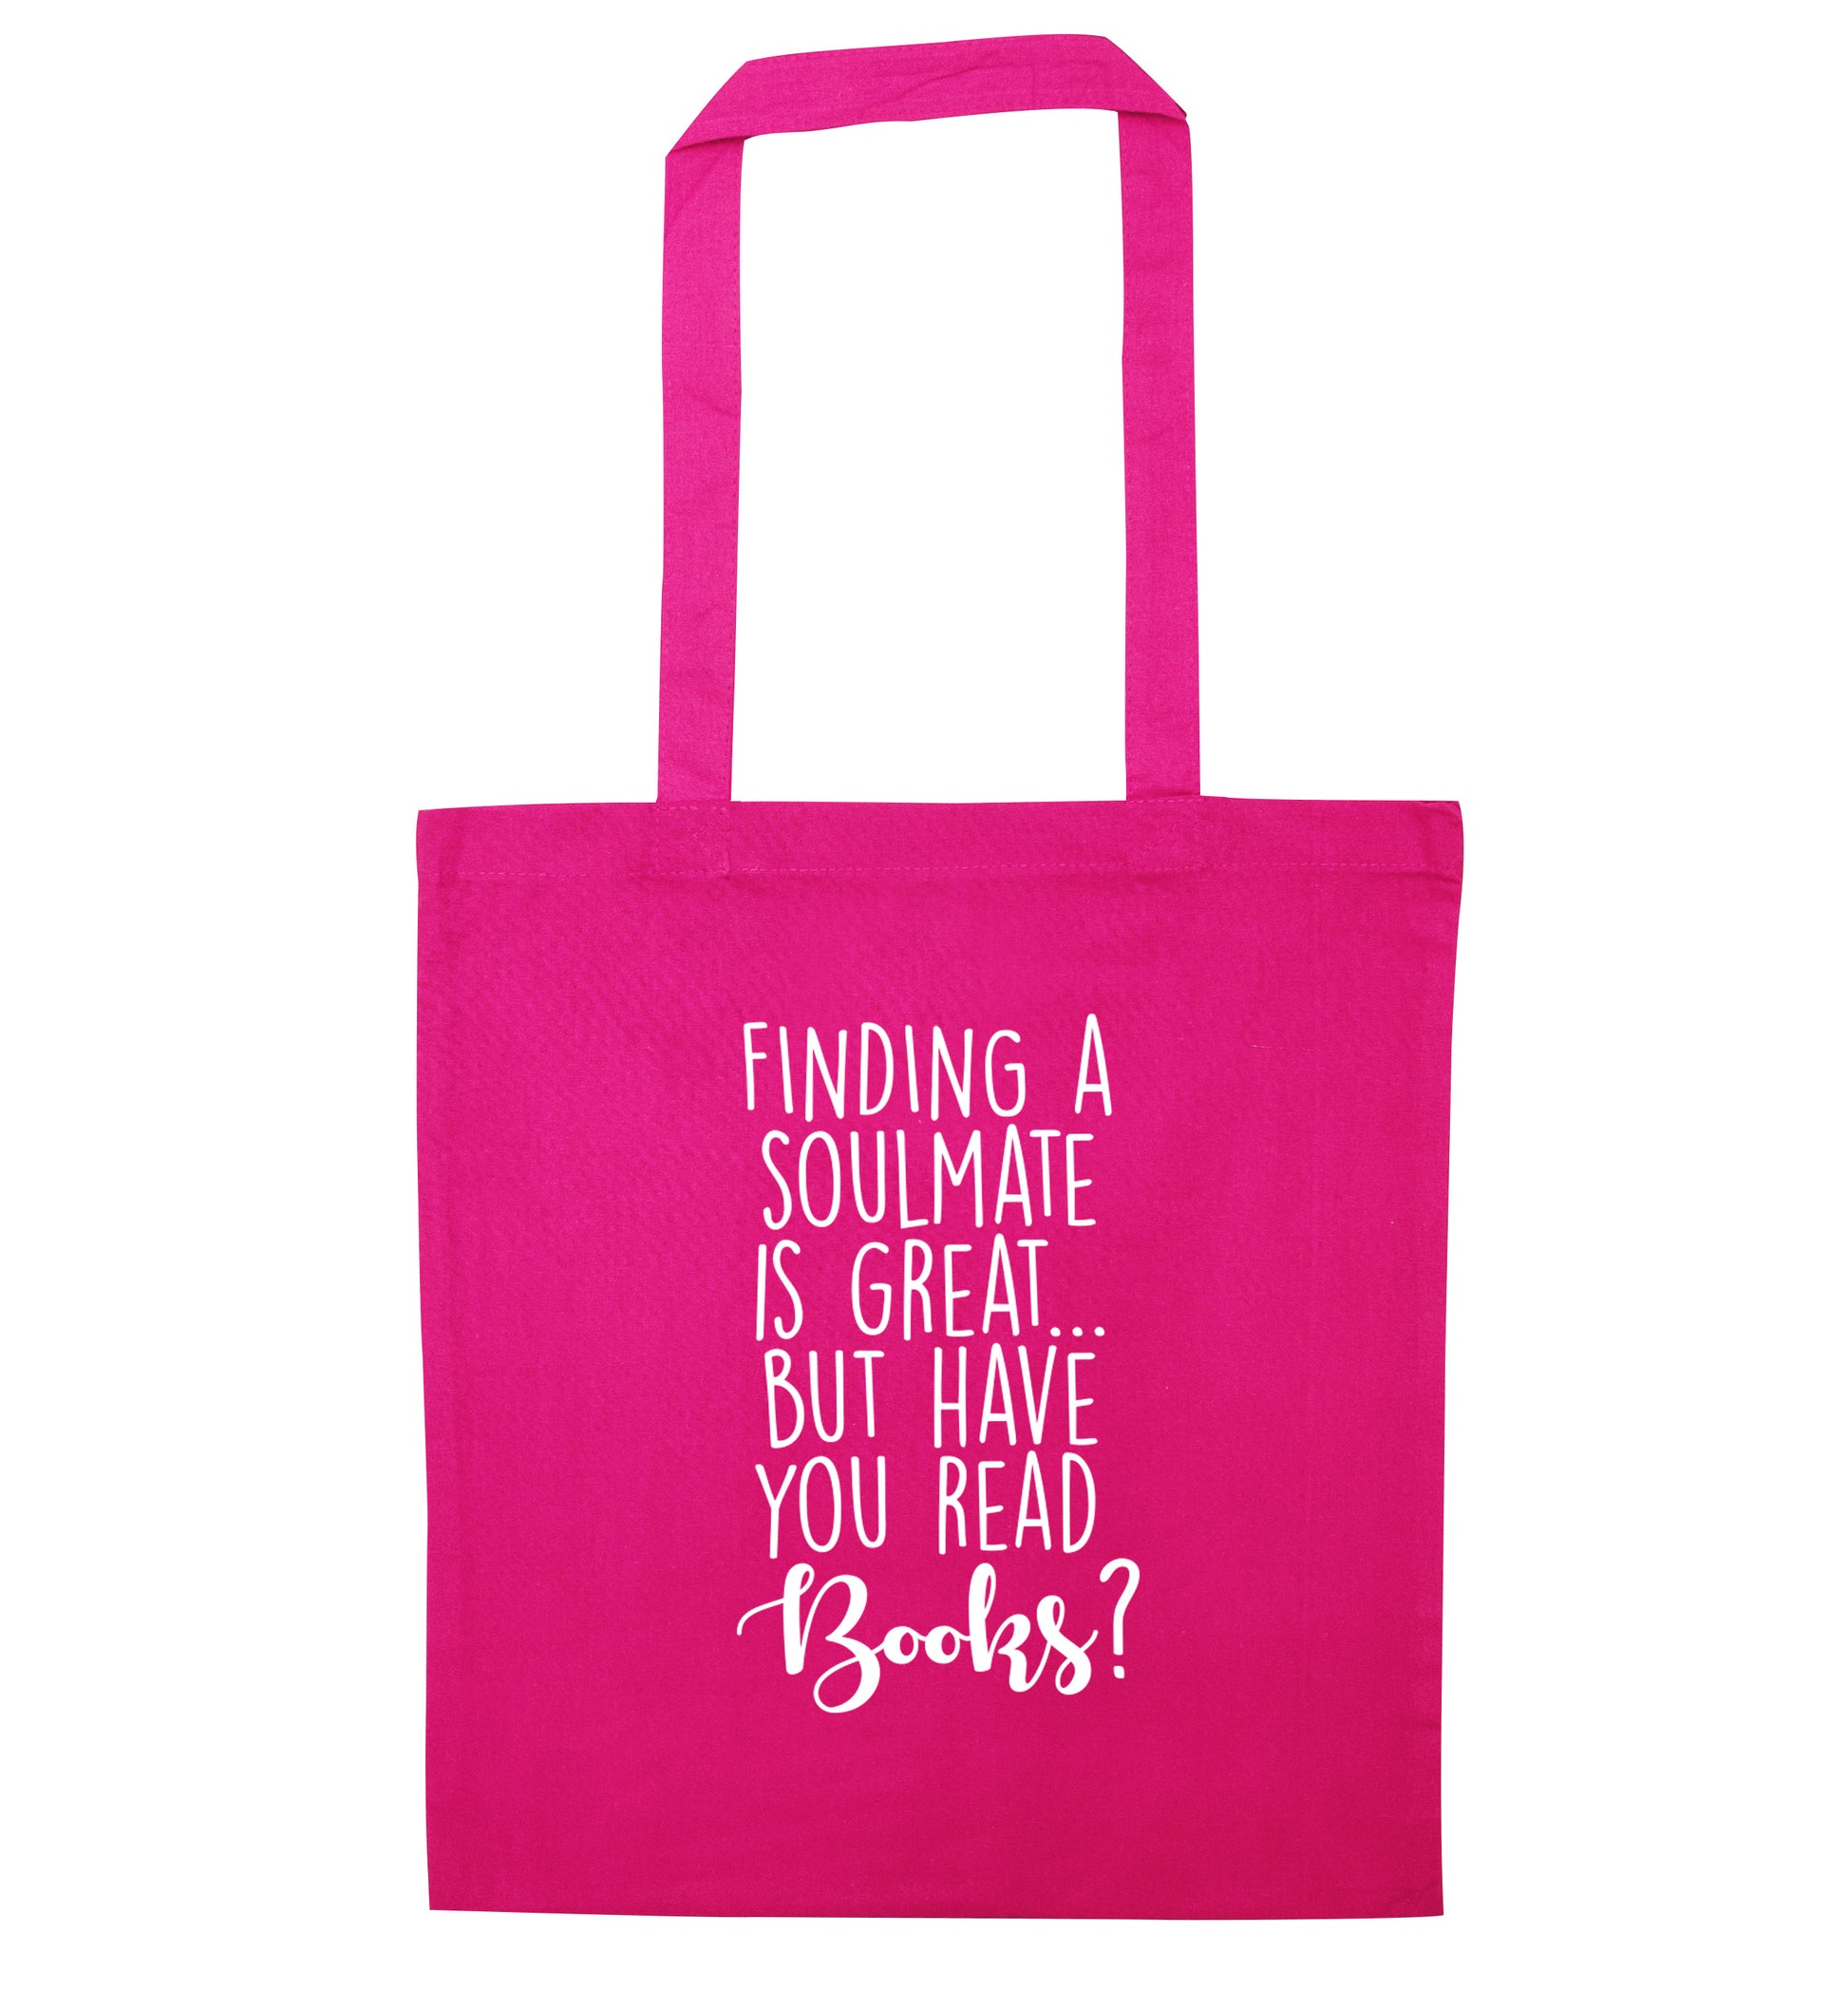 Finding a soulmate is great but have you read books? pink tote bag